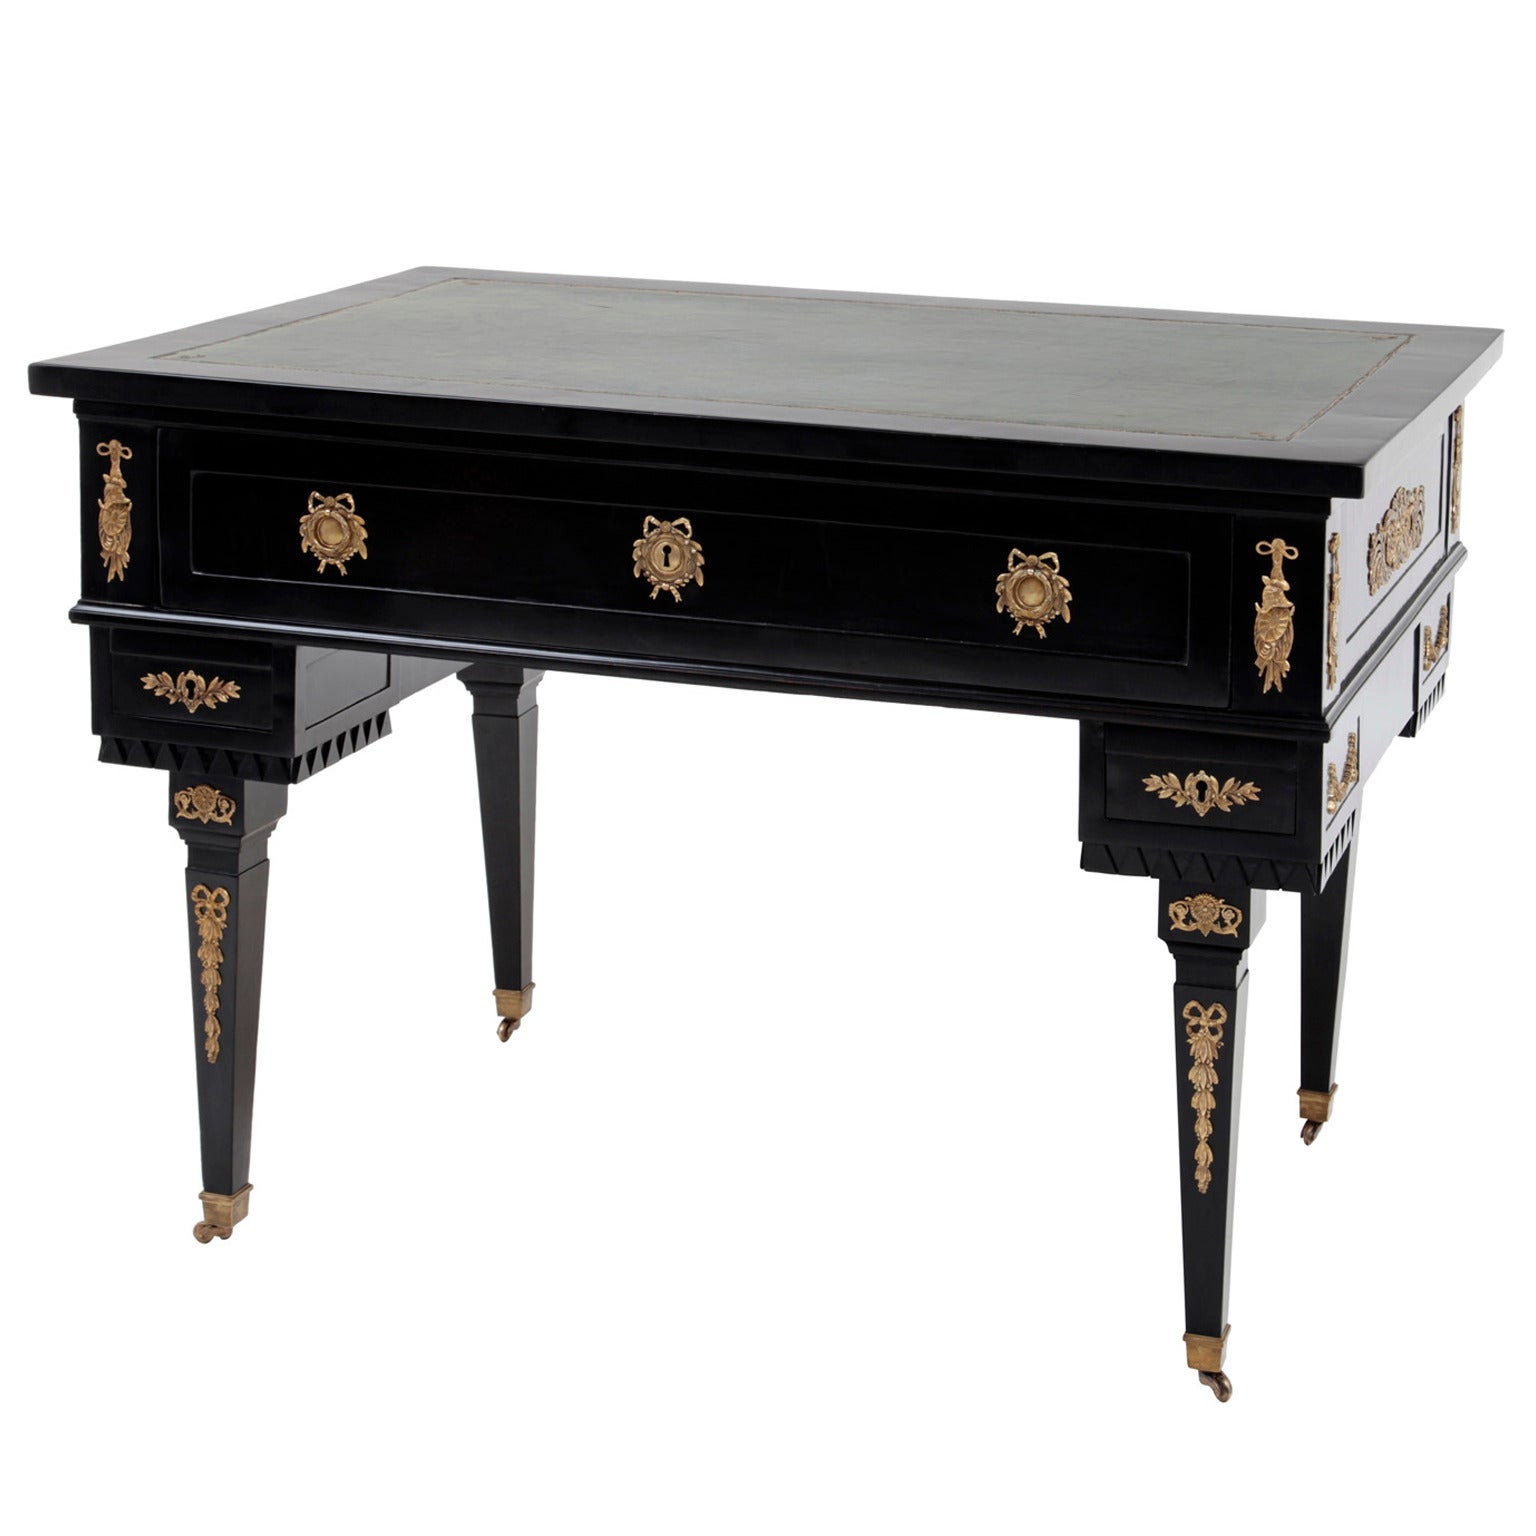 Elegant Classicist Writing Desk from the Early 19th Century